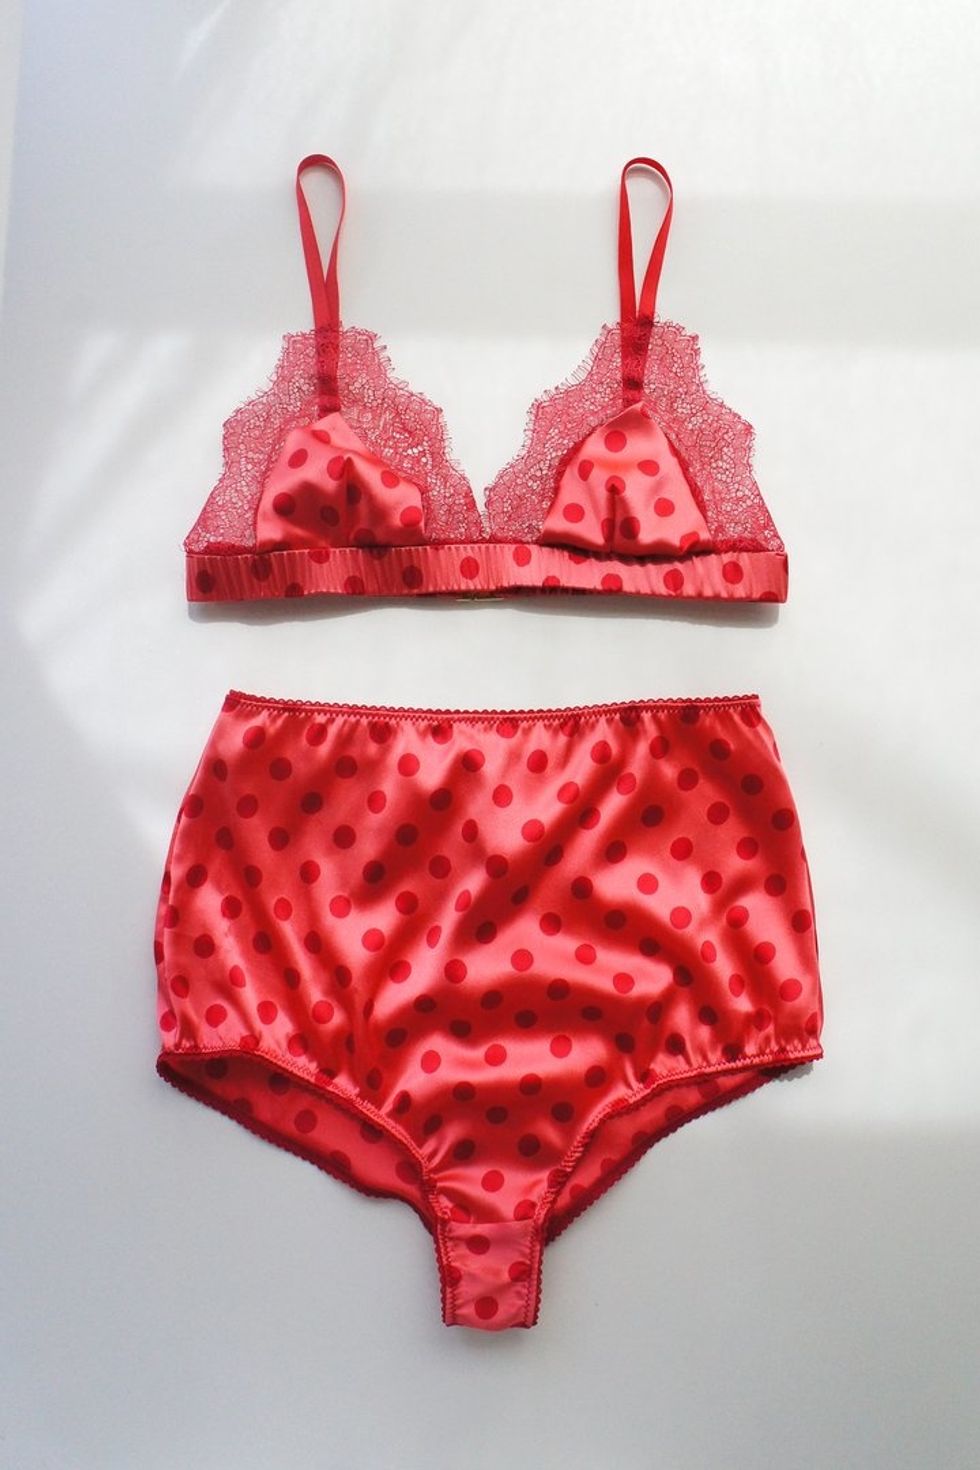 Independent Lingerie Brands to Shop this Valentine's Day - Brit + Co